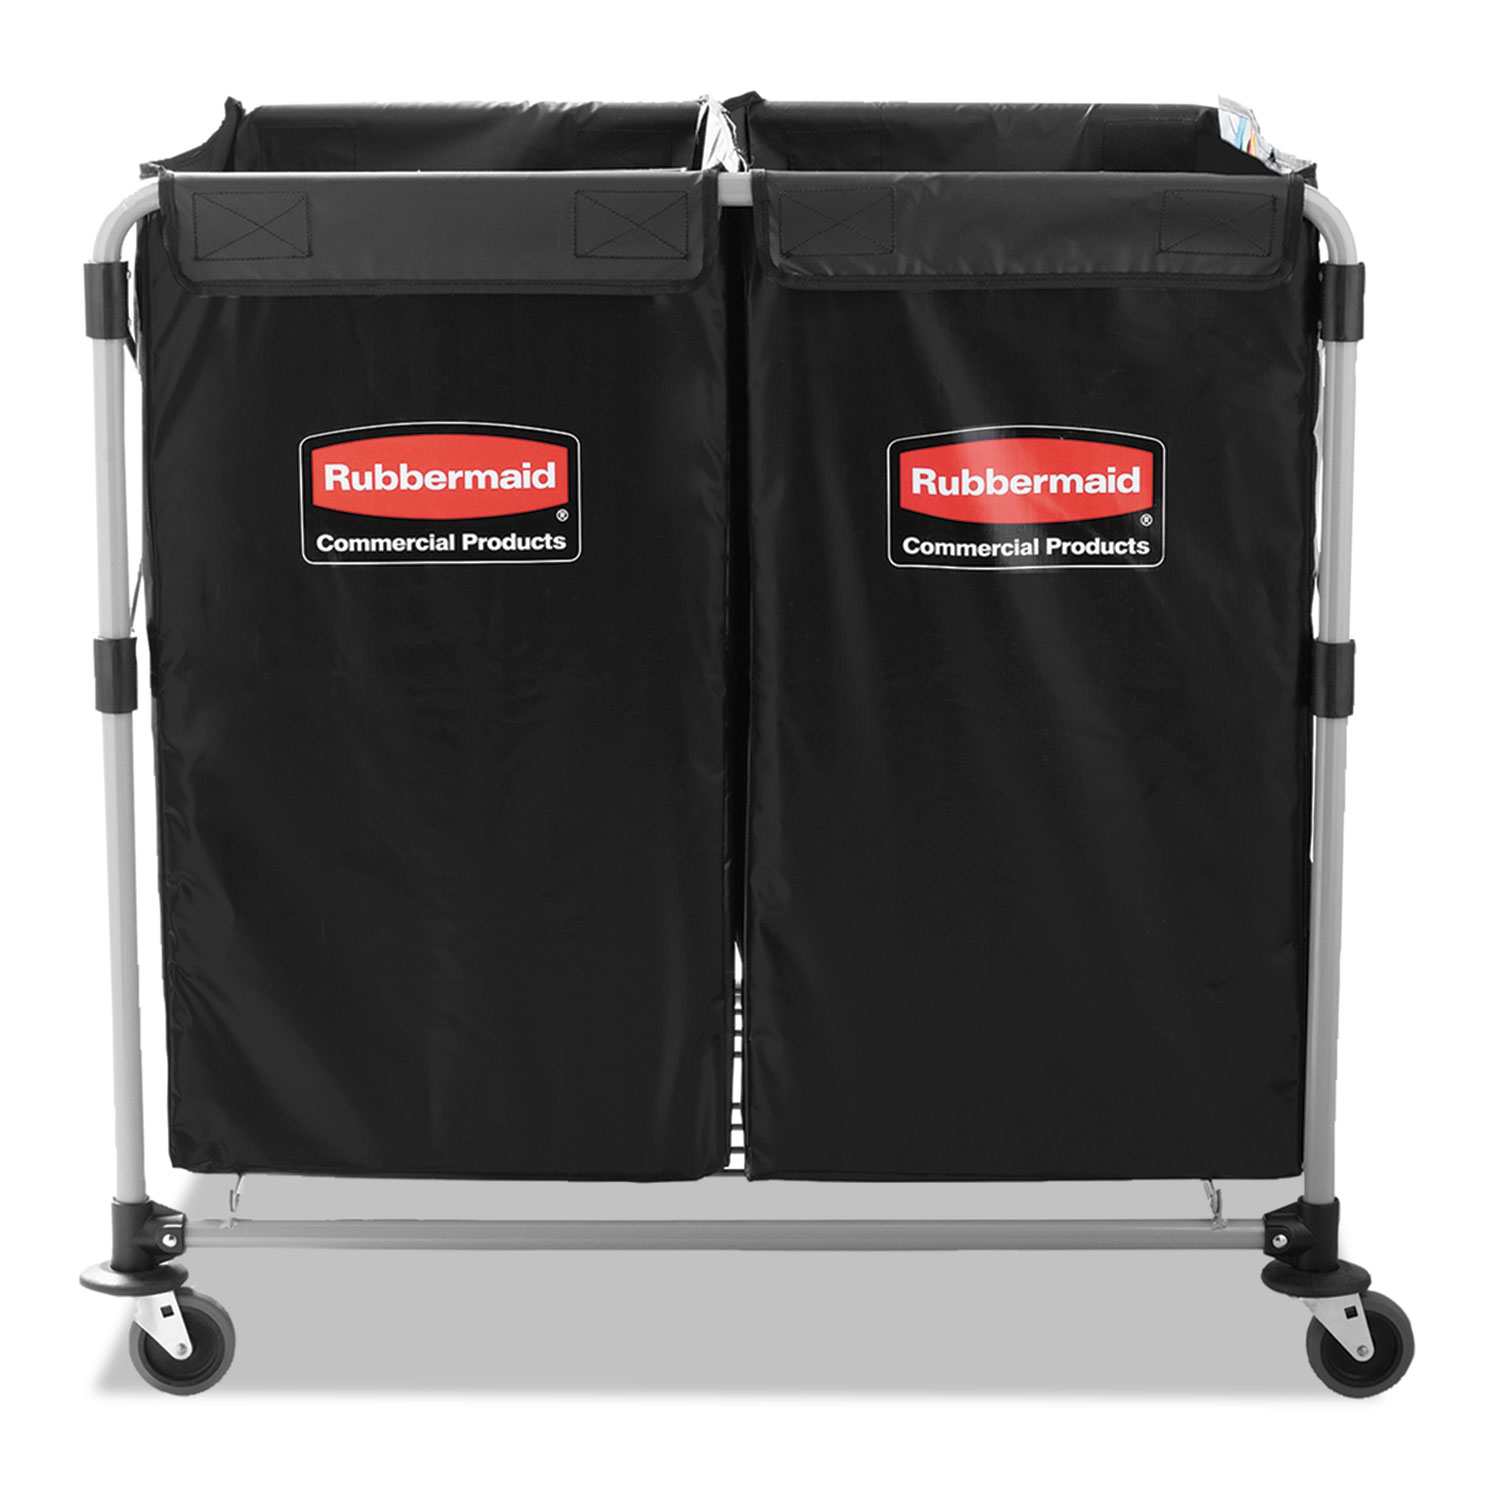  Rubbermaid Commercial 1881781 Collapsible X-Cart, Steel, 2 to 4 Bushel Cart, 24.1w x 35.7d x 34h, Black/Silver (RCP1881781) 